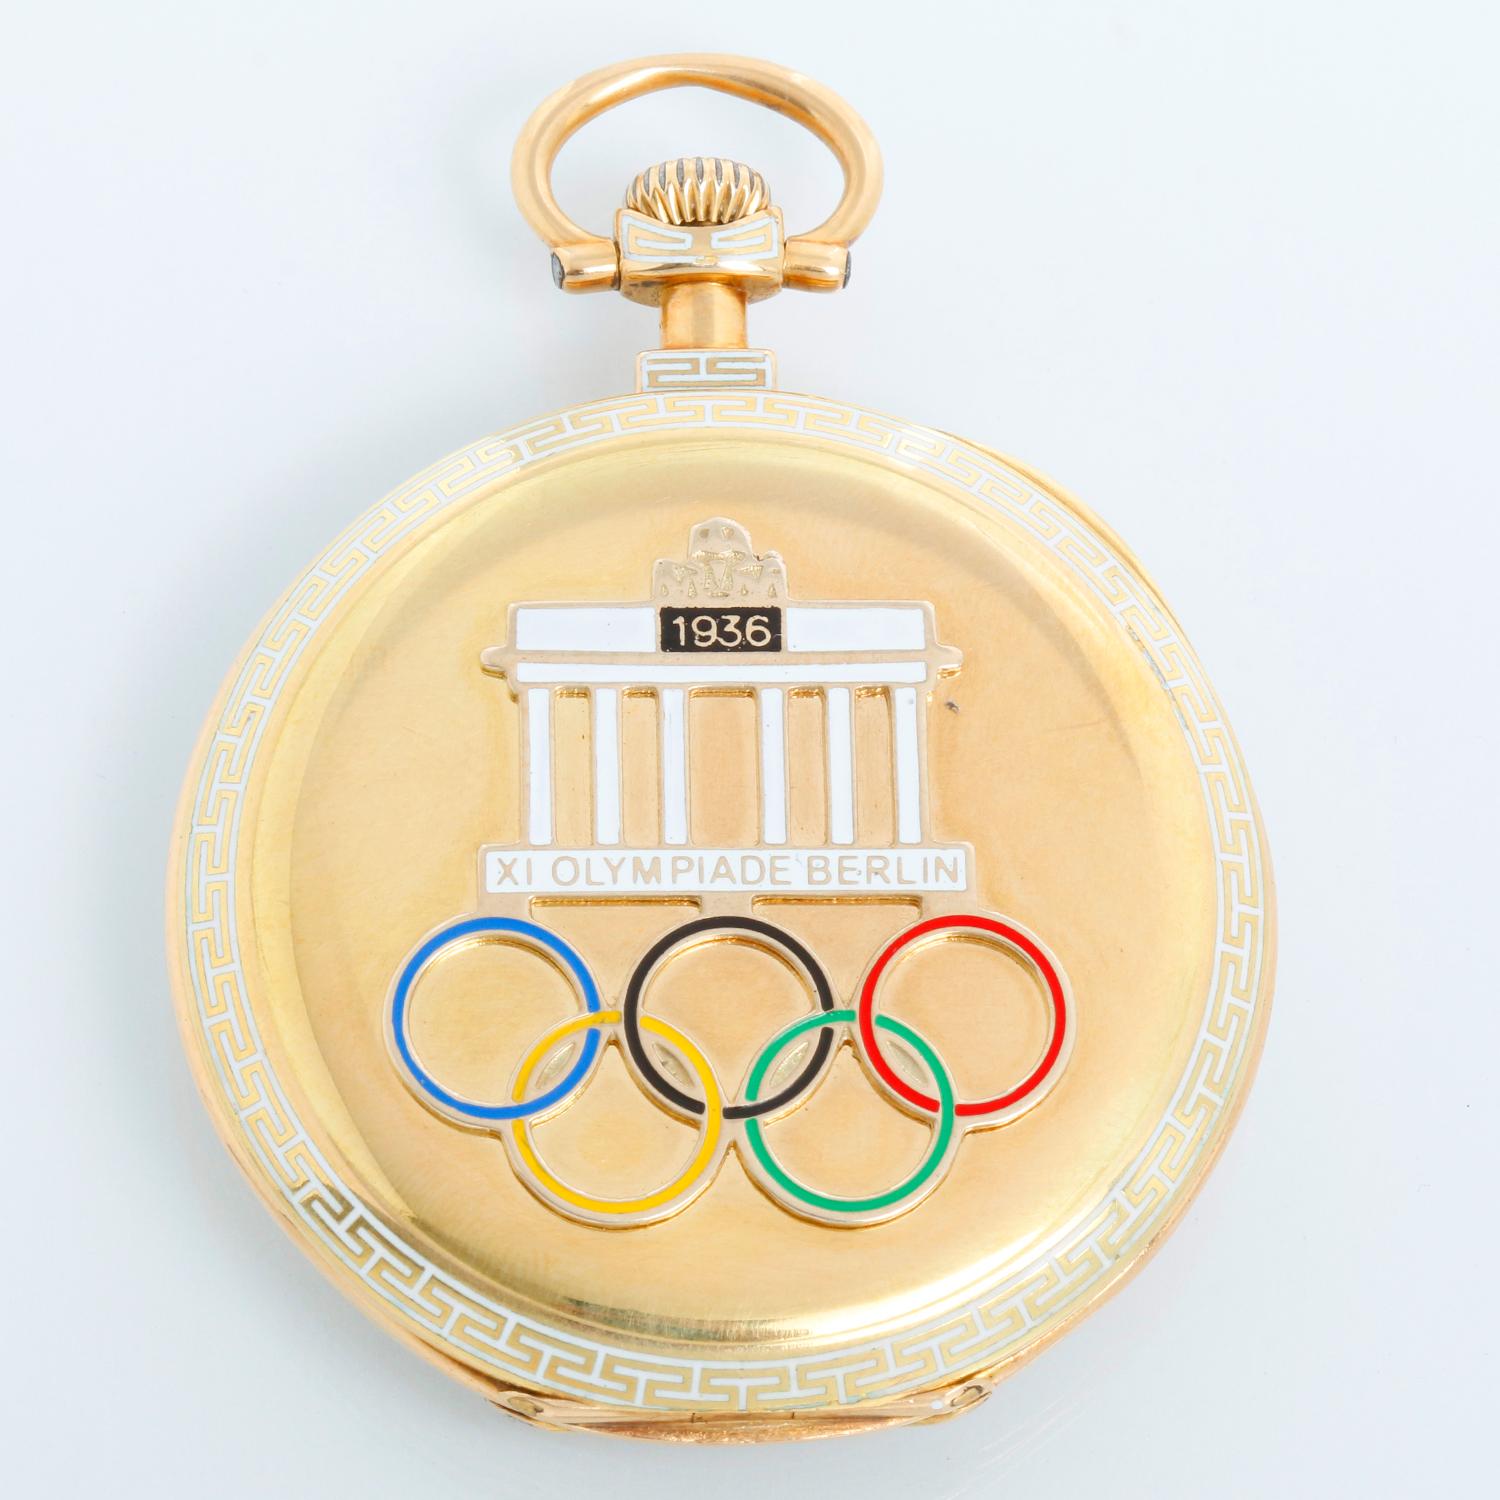 Rare Patek Philippe 18K Yellow Gold Pocket Watch Commemorating The 1936 Berlin Olympics - Manual winding. 18K Yellow gold hdeinged case  with White enamel Greek key and Olympic rings and Brannburg Gate on the back  ( 48mm ). White enamel dial with